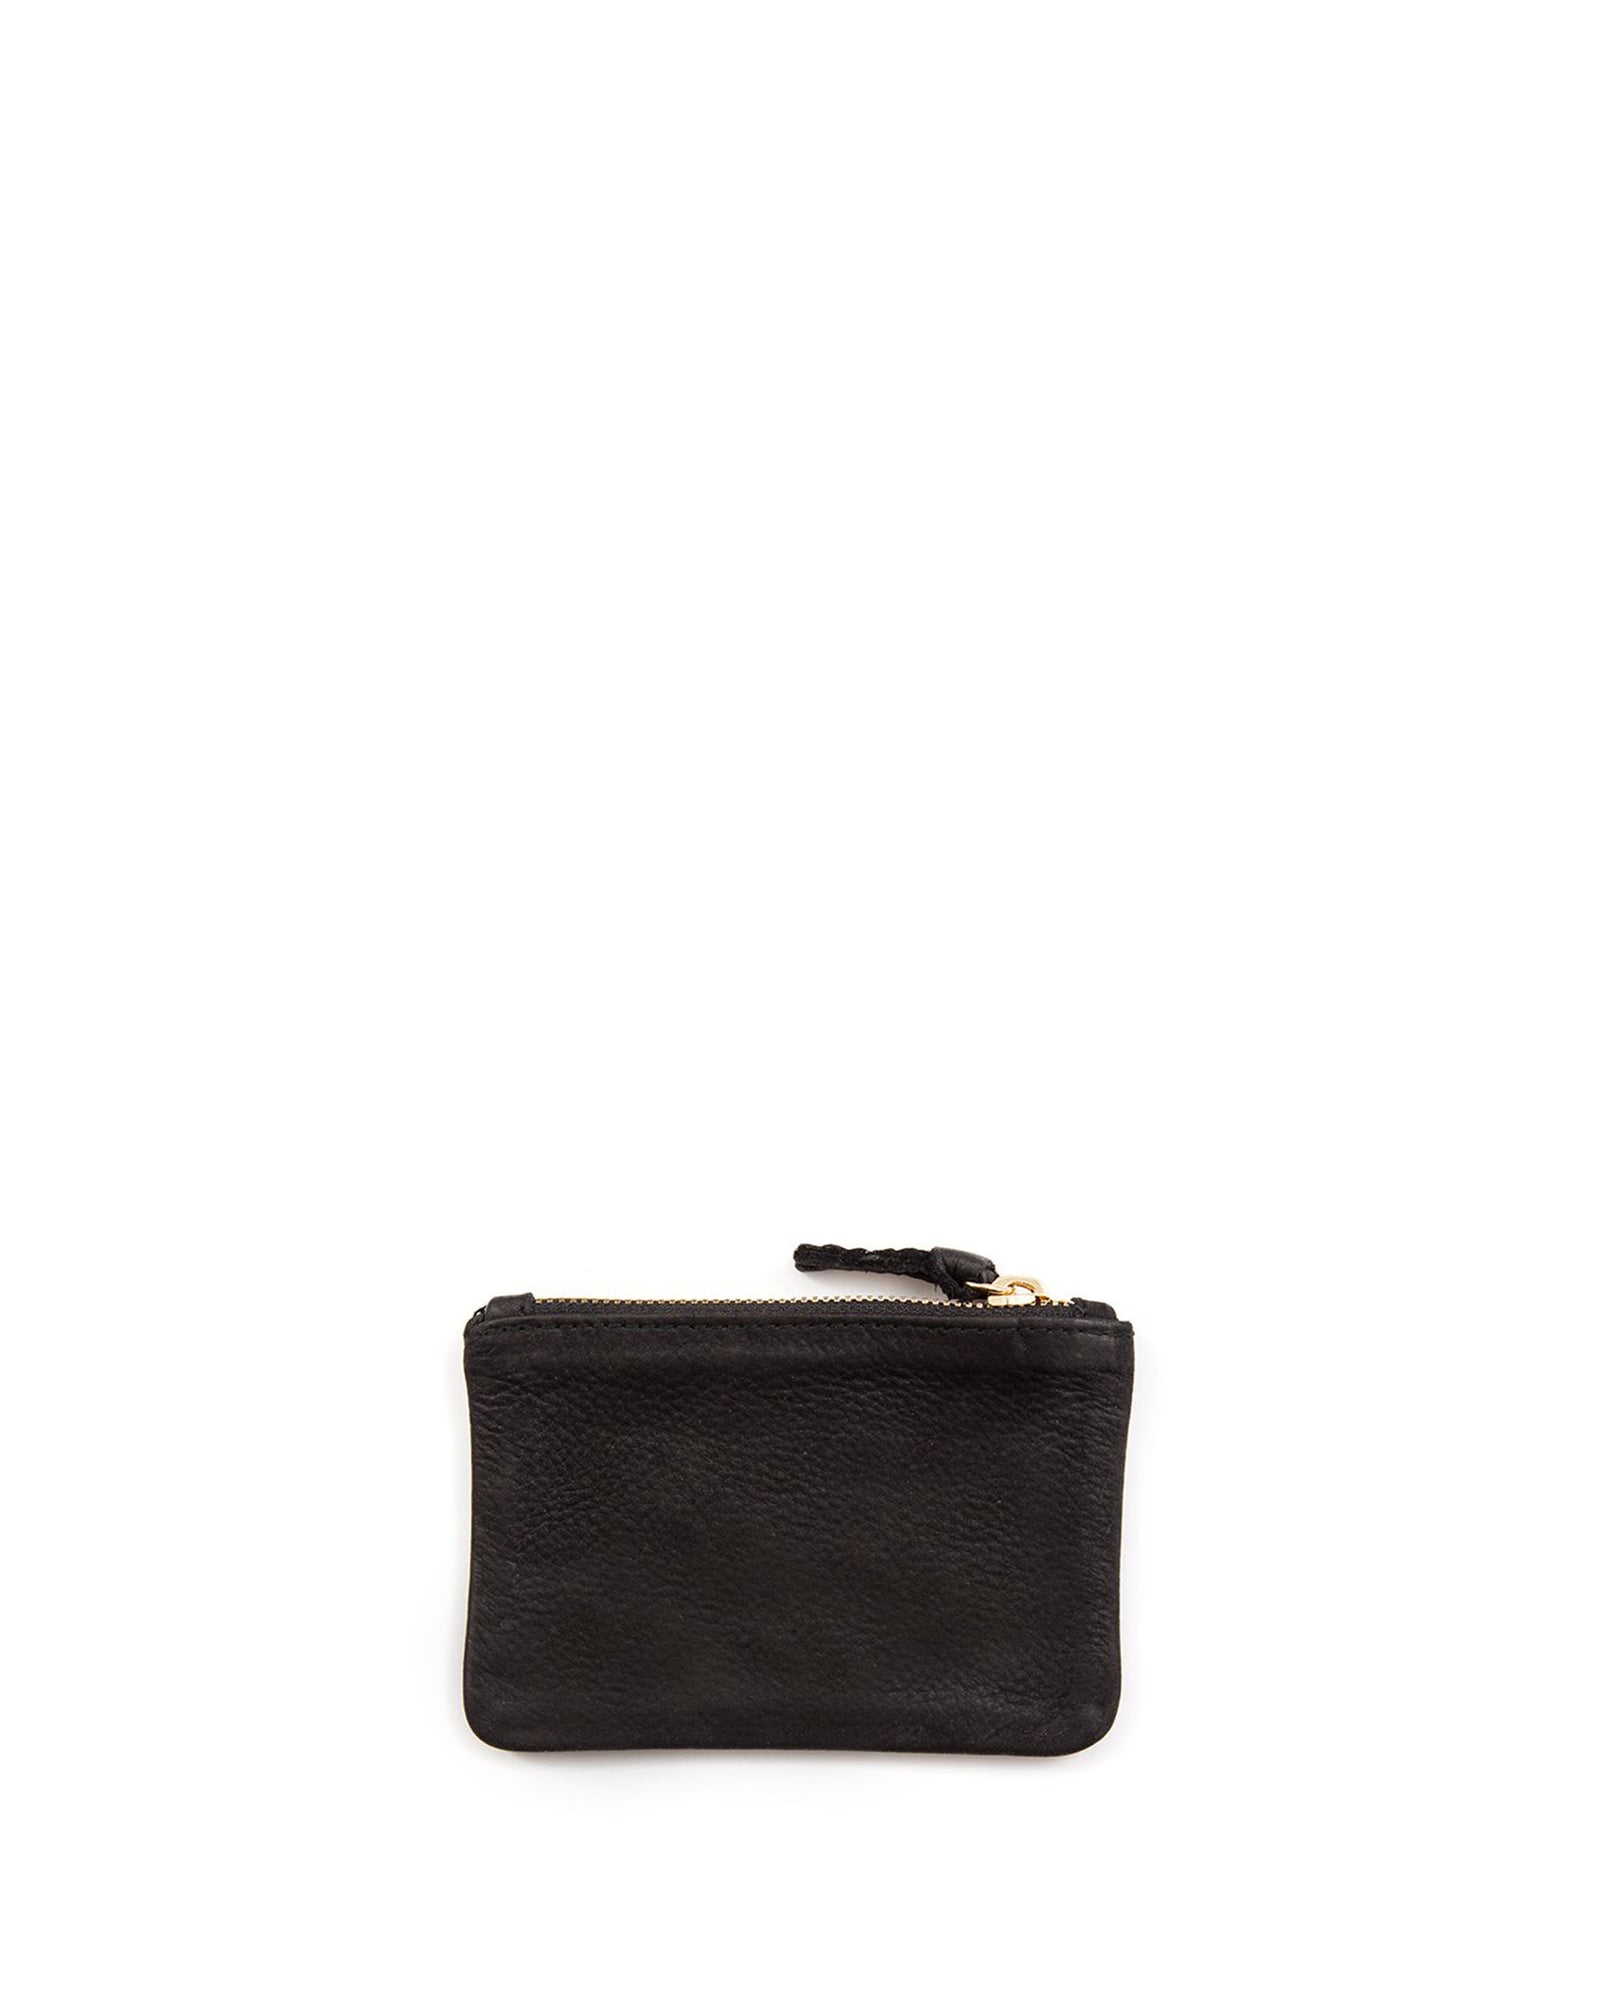 Gold Clutch Bag Leather Clutch With Wrist Strap and Zipper -  Norway